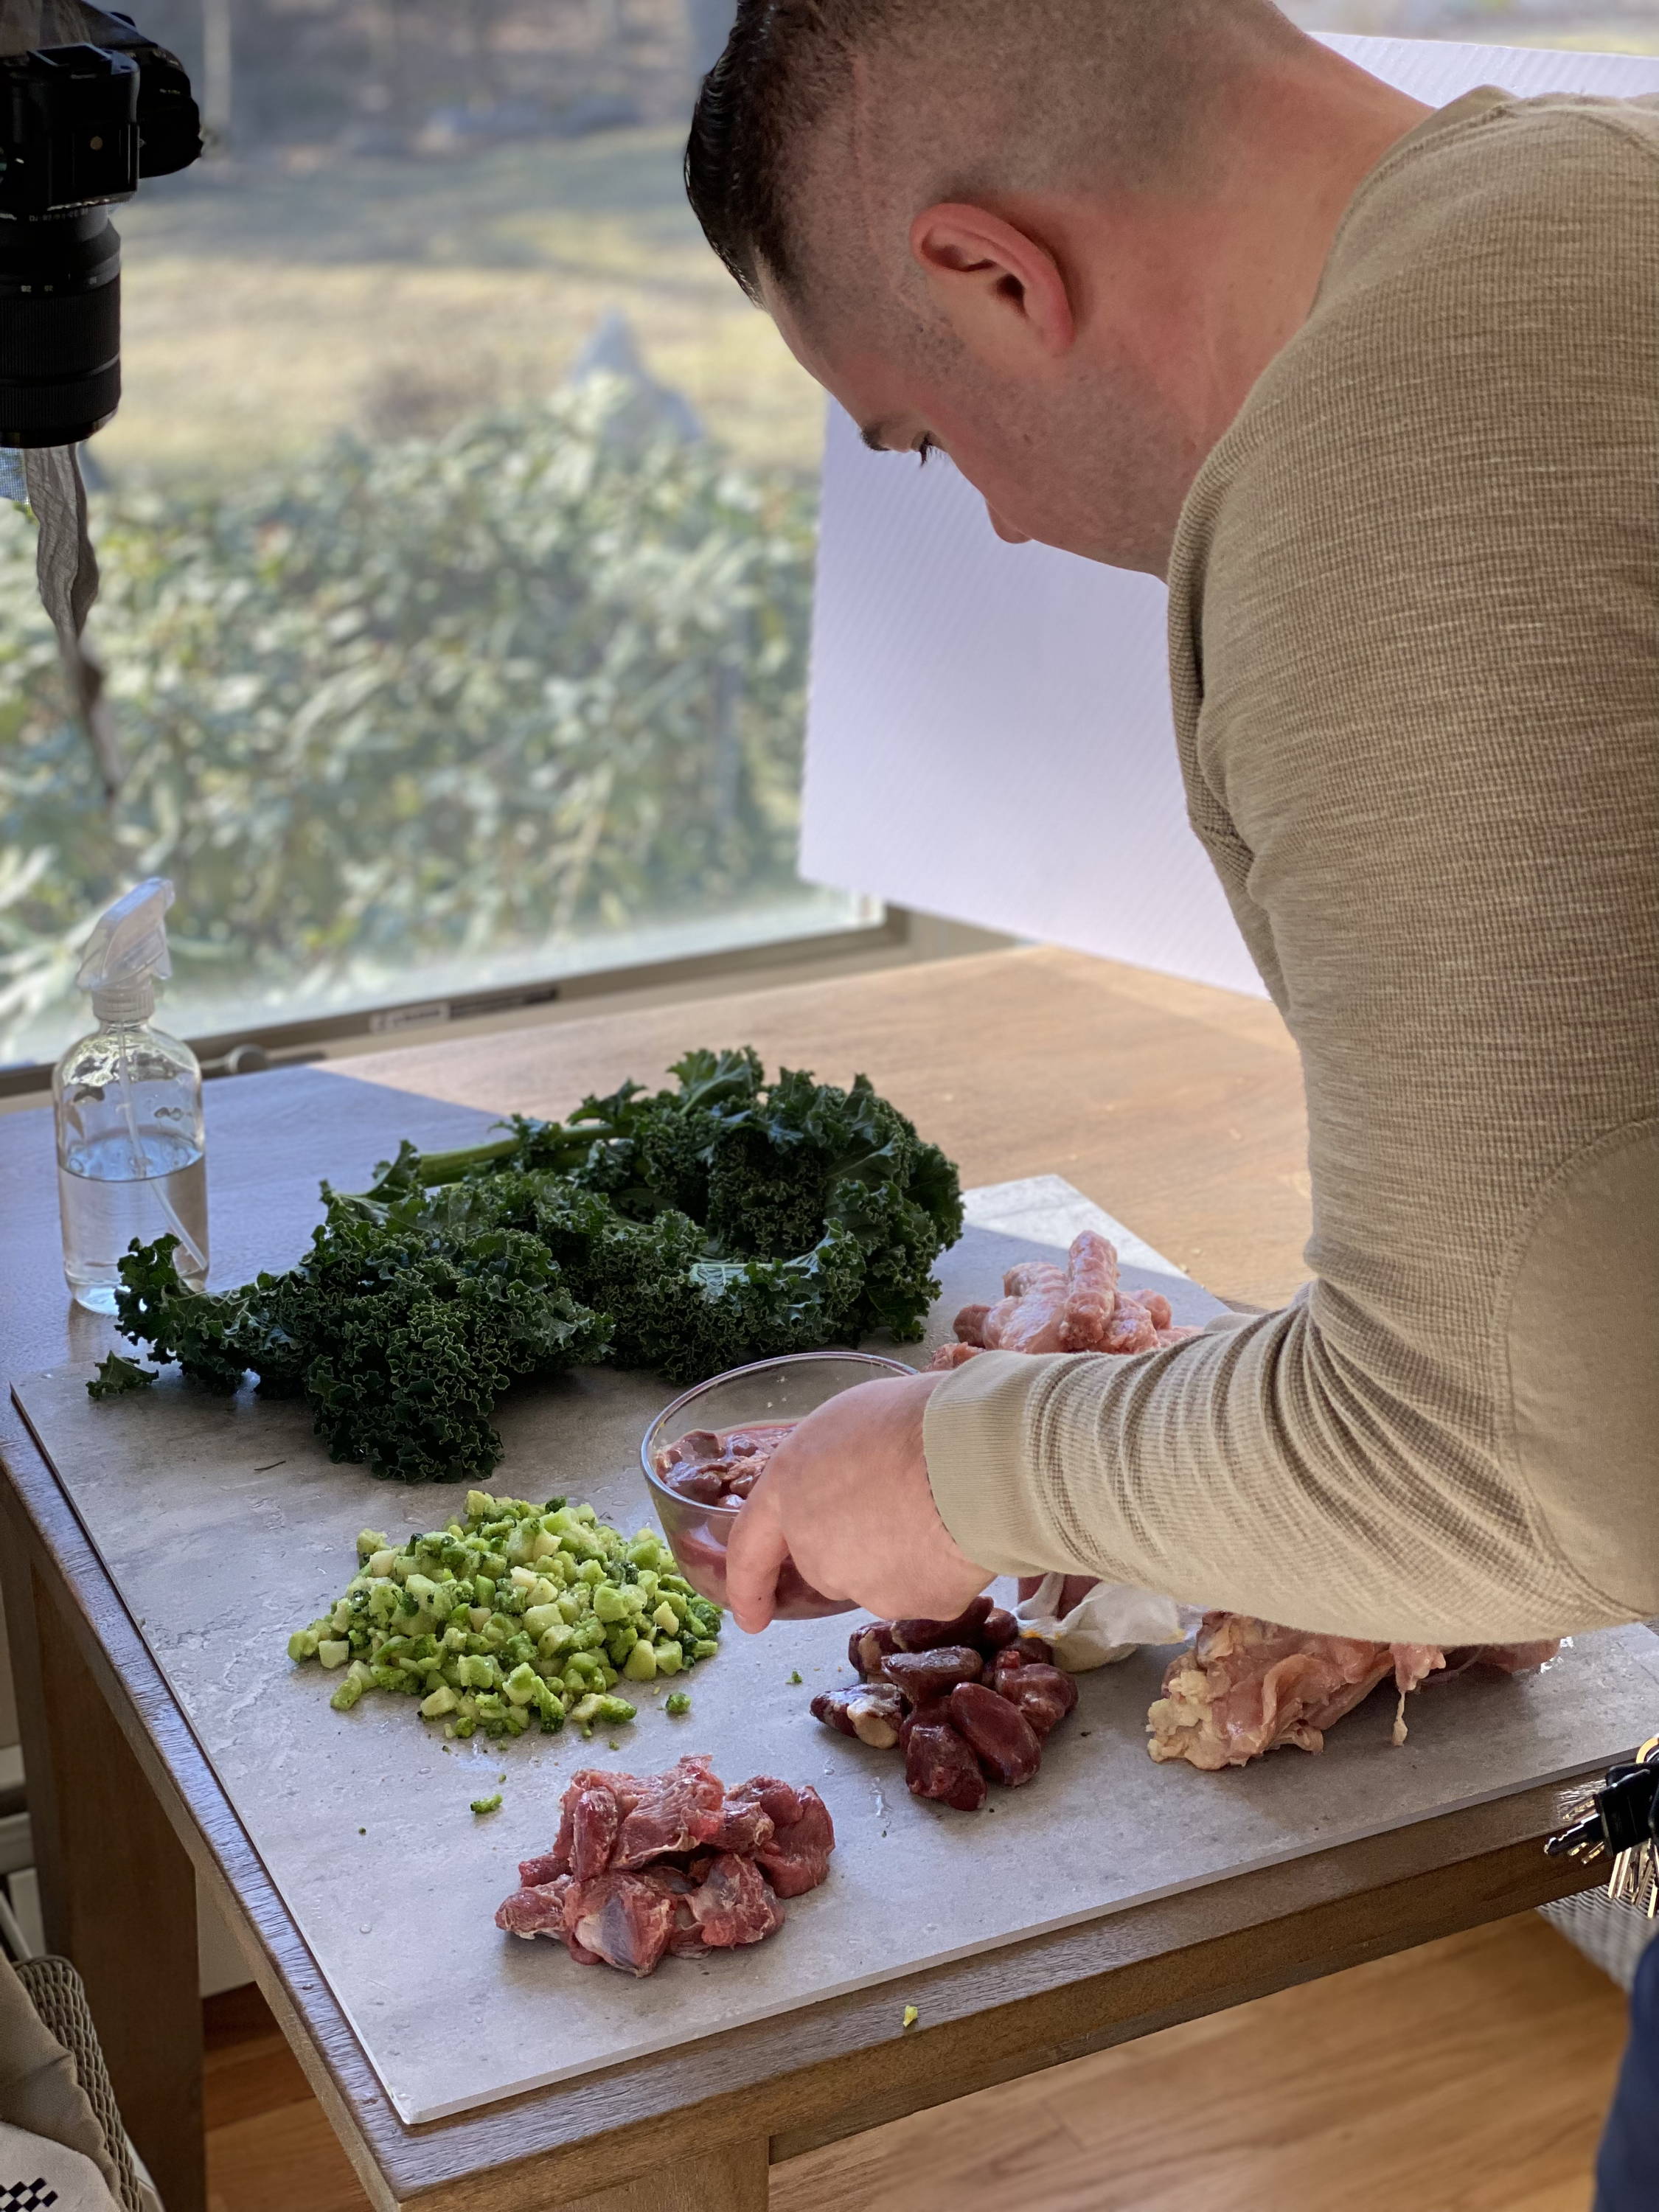 Man arranges meat and vegetables on table for photoshoot.